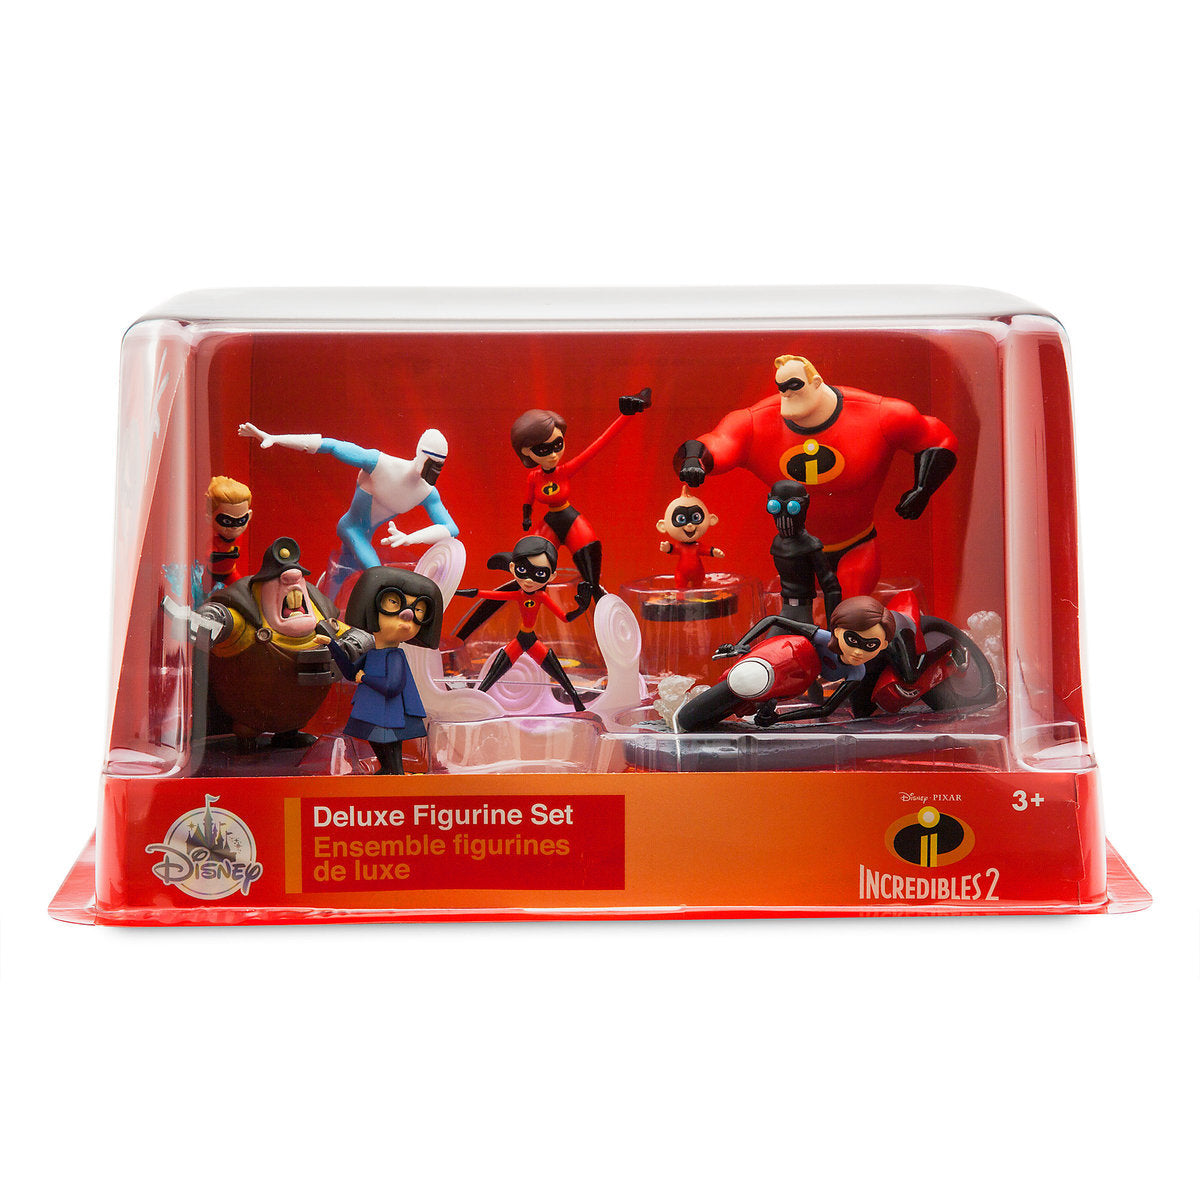 Disney Store Incredibles 2 Deluxe Figure Set 10 Play Set Playset Cake Topper New